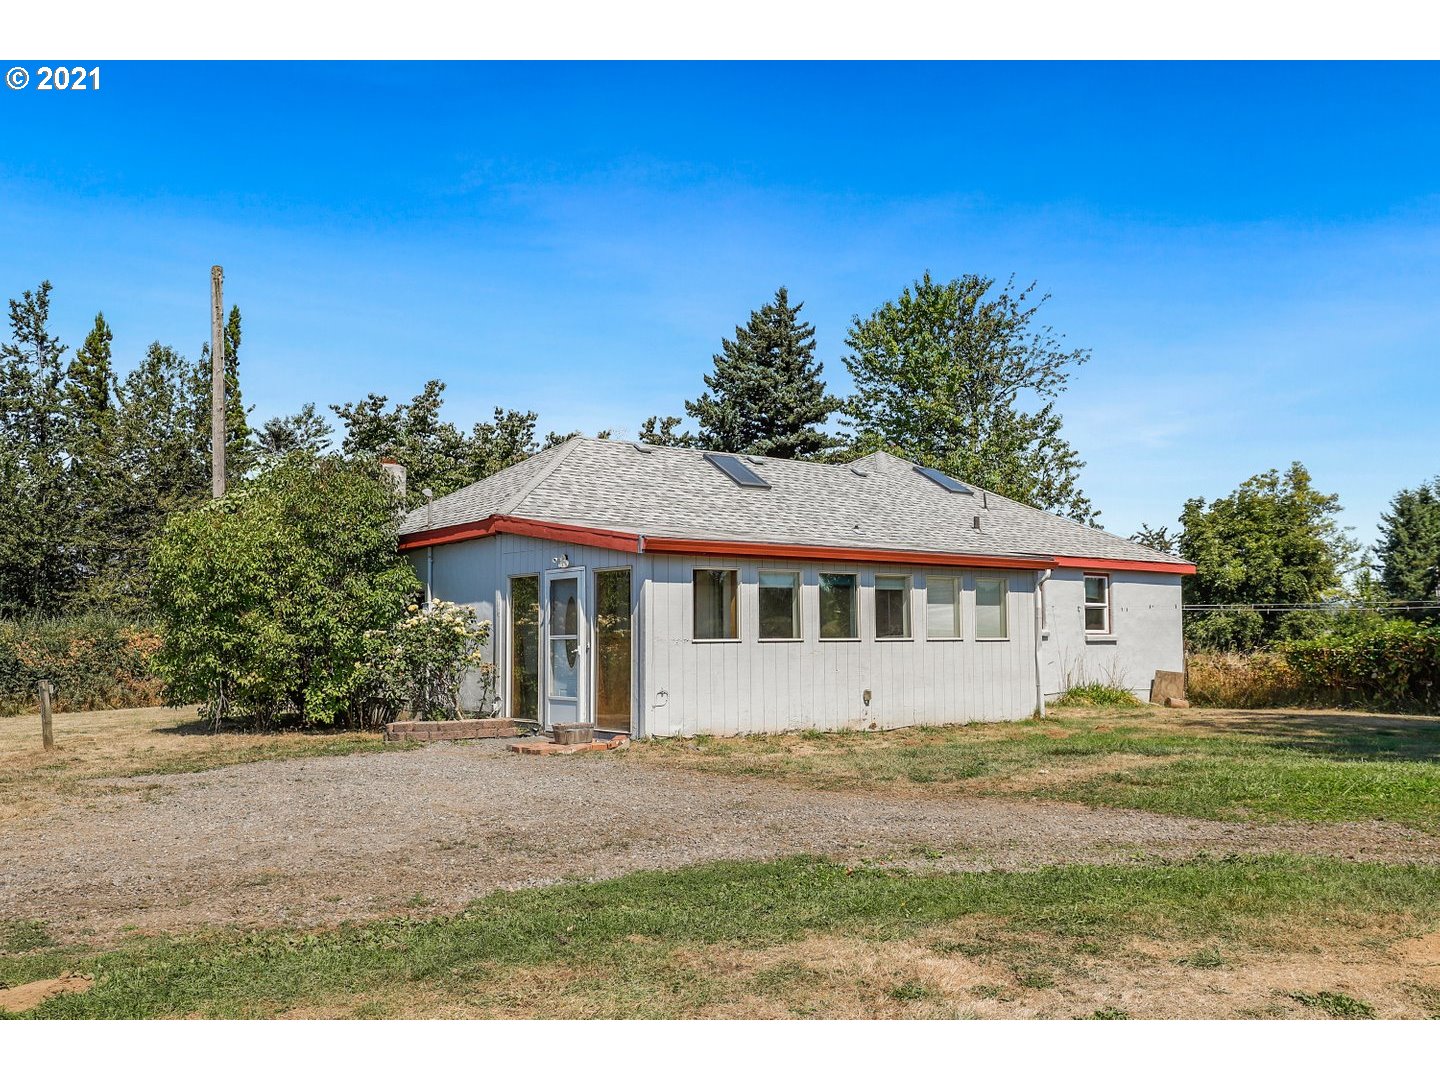 38600 E HIST COLUMBIA RIVER HWY (1 of 26)